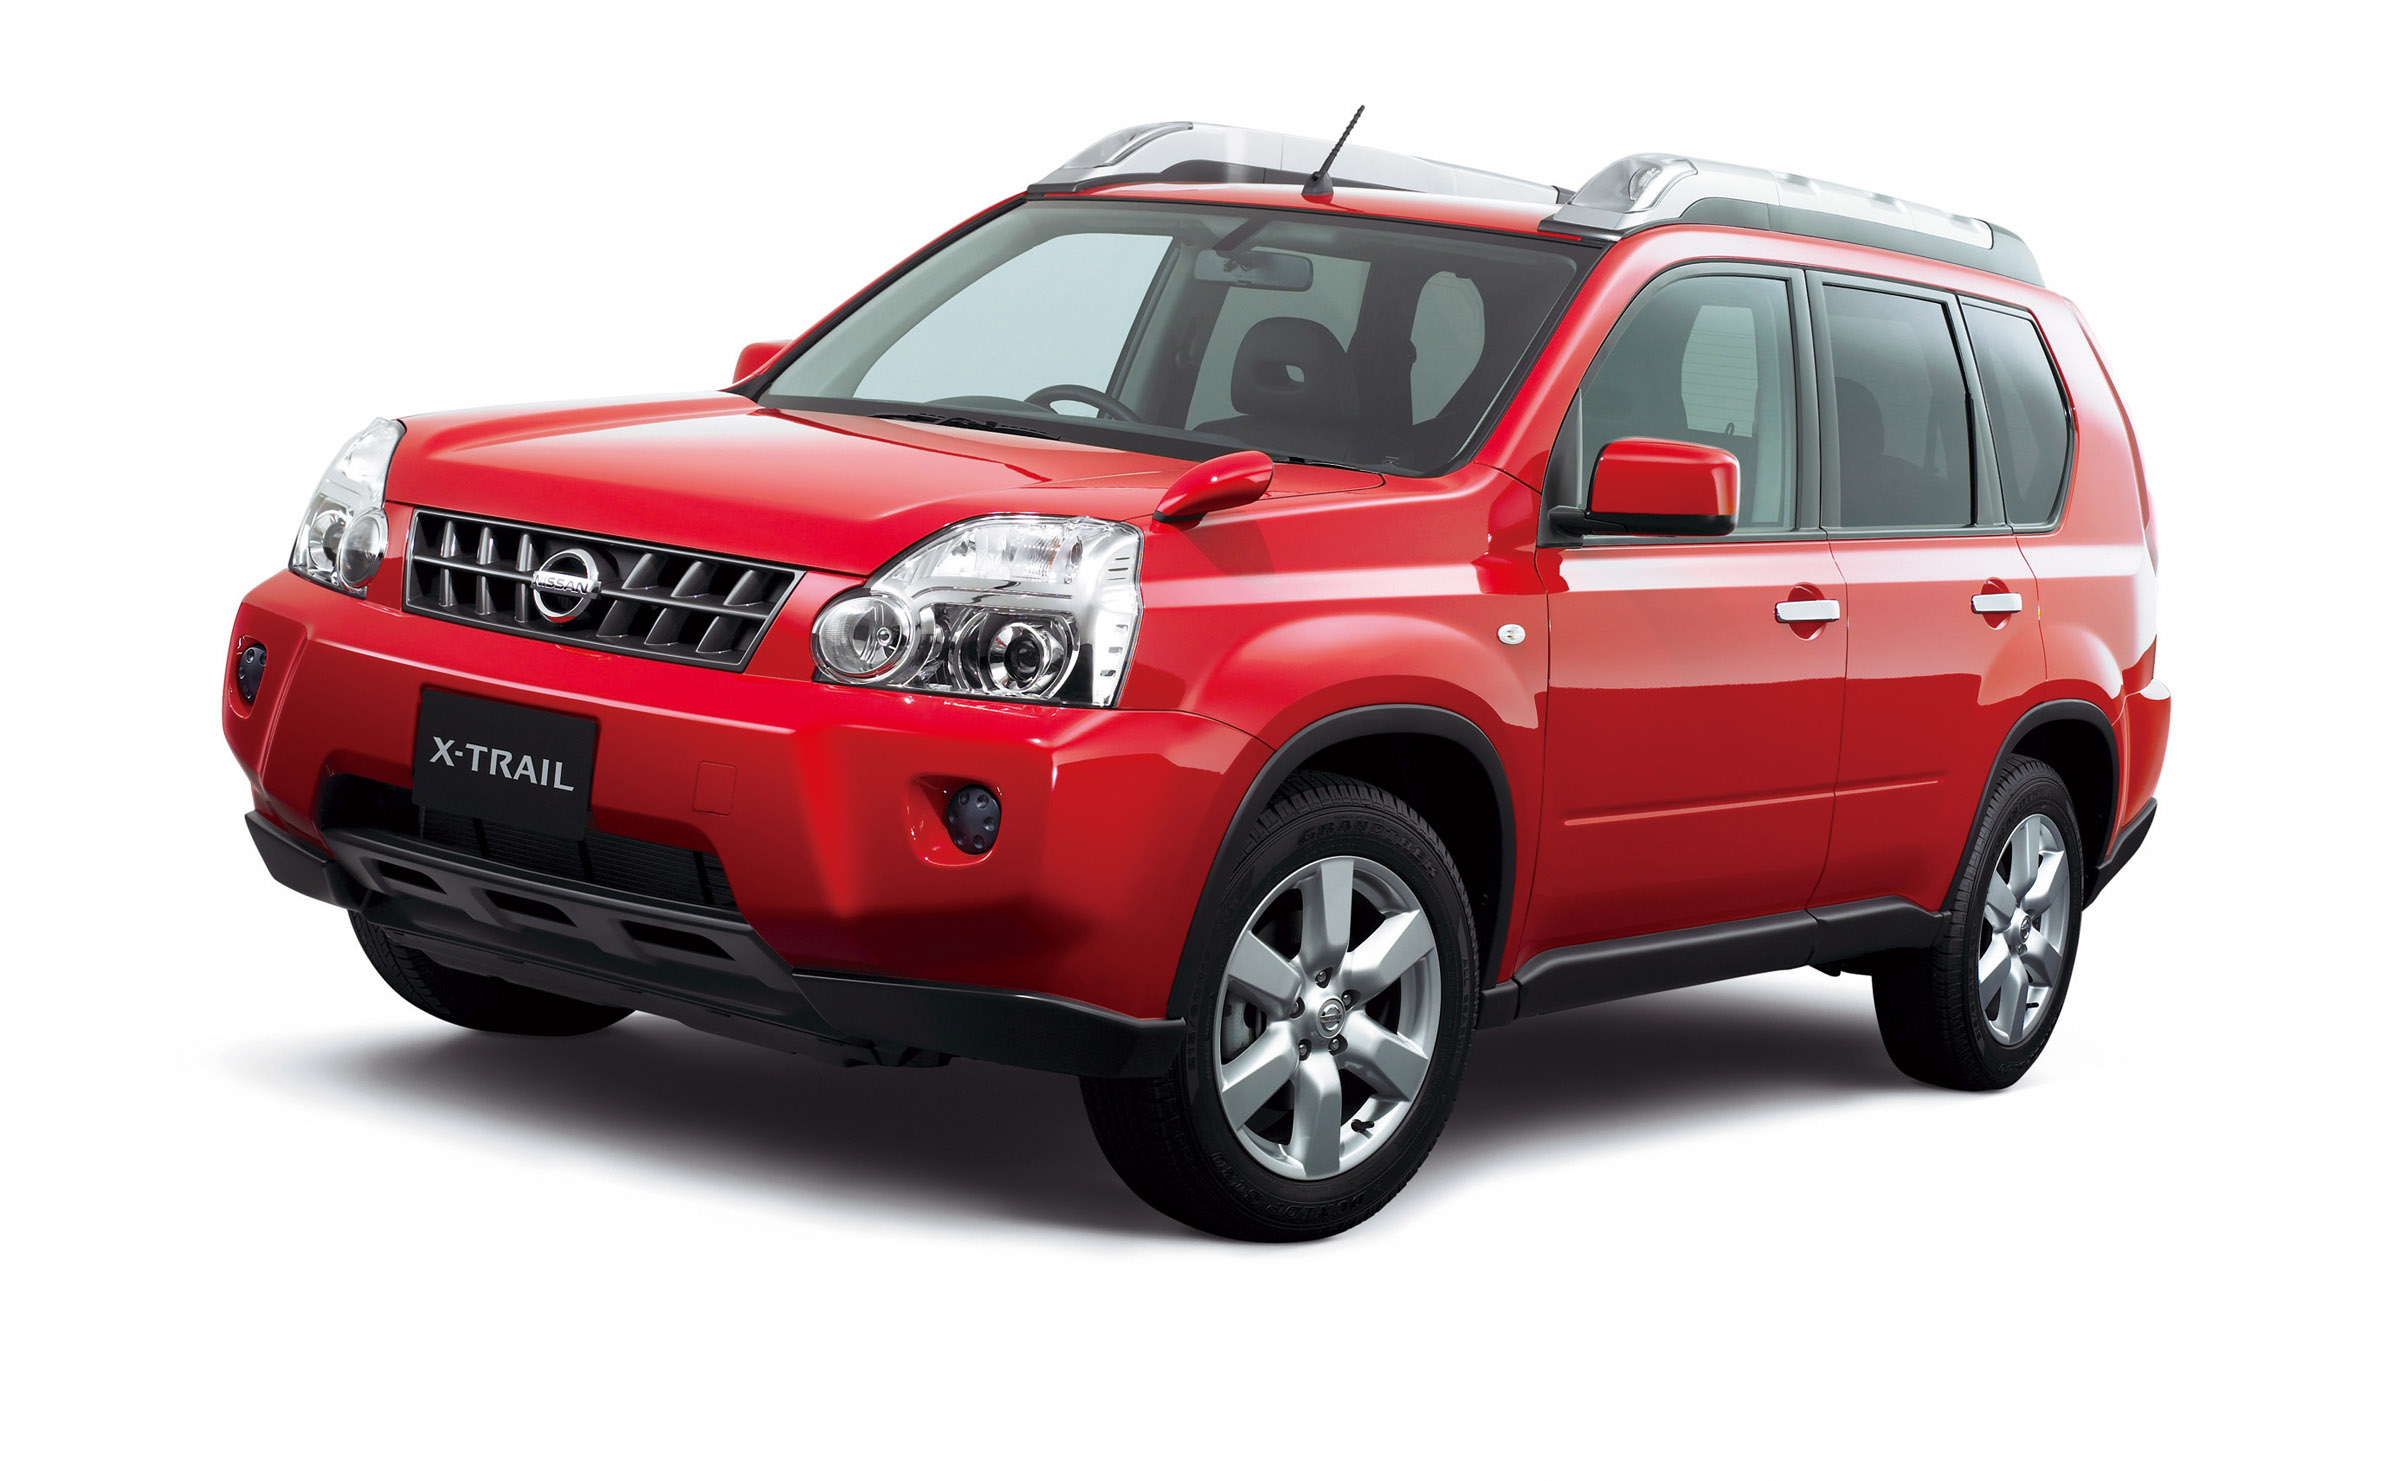 Nissan x trail 08 review #2